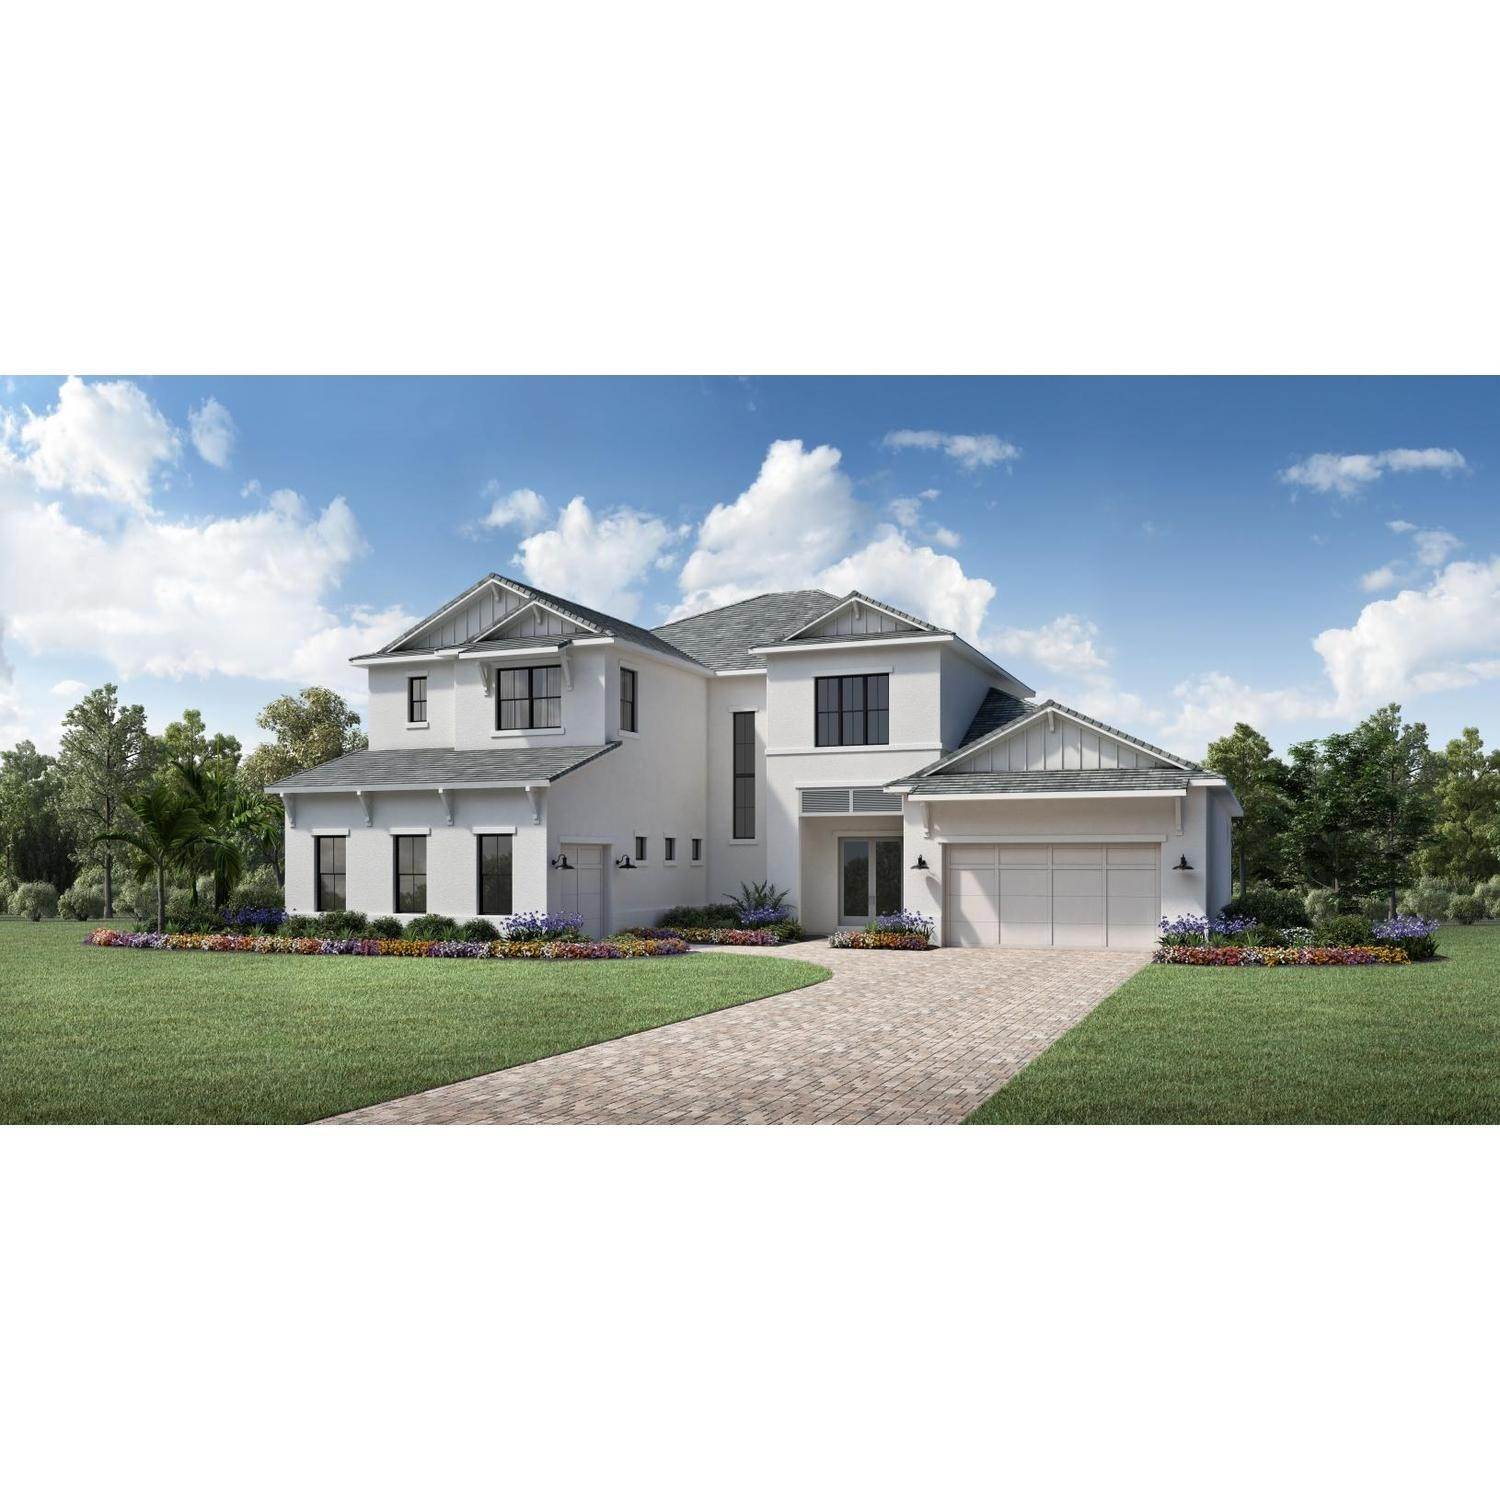 Single Family for Sale at Narcoossee Rd & Luminary Blvd Narcoossee Rd & Luminary Blvd, Orlando, FL 32832